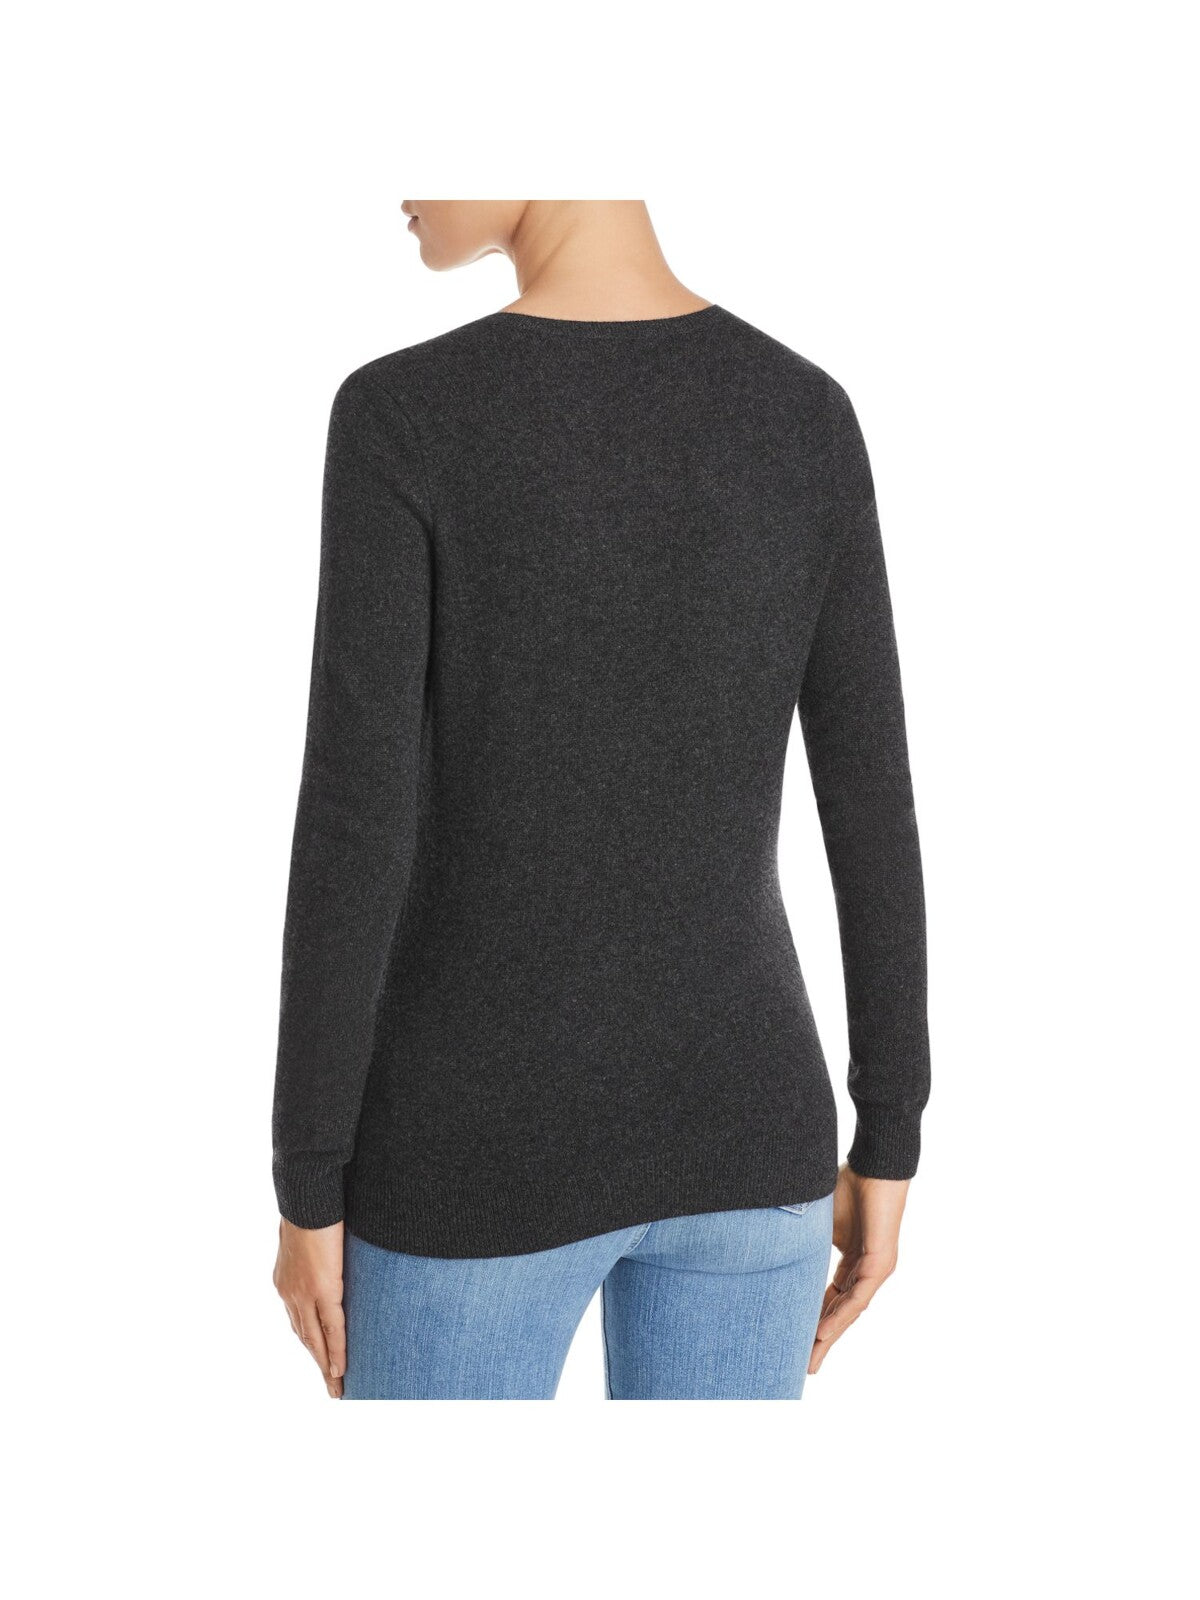 C Womens Gray Cashmere Long Sleeve V Neck Wear To Work Top S